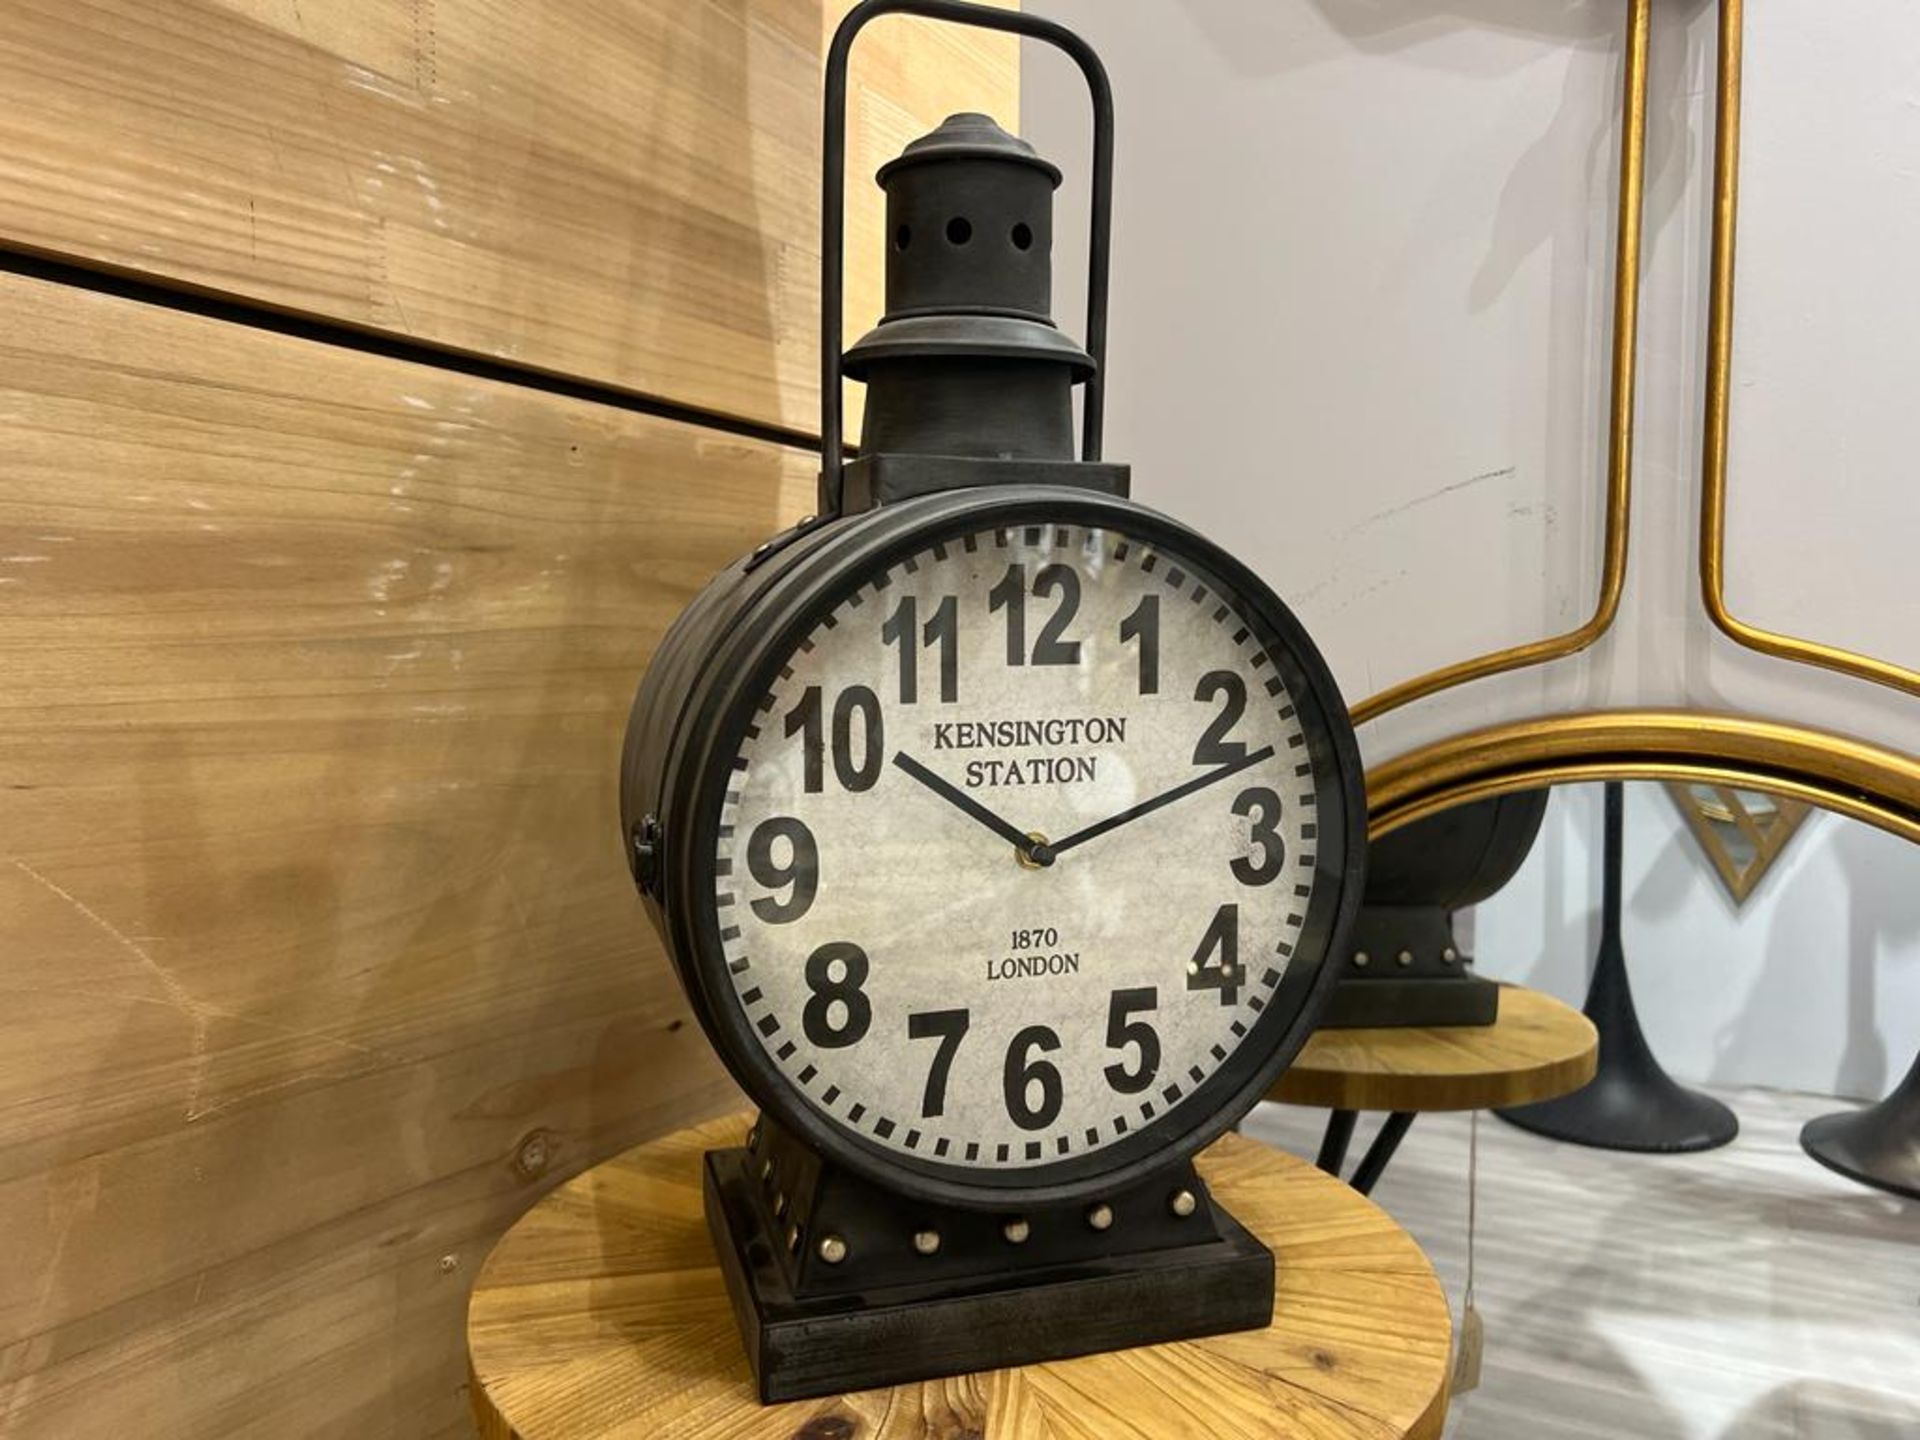 New Boxed Industrial Style Kensington Carriage Clock - Image 2 of 2